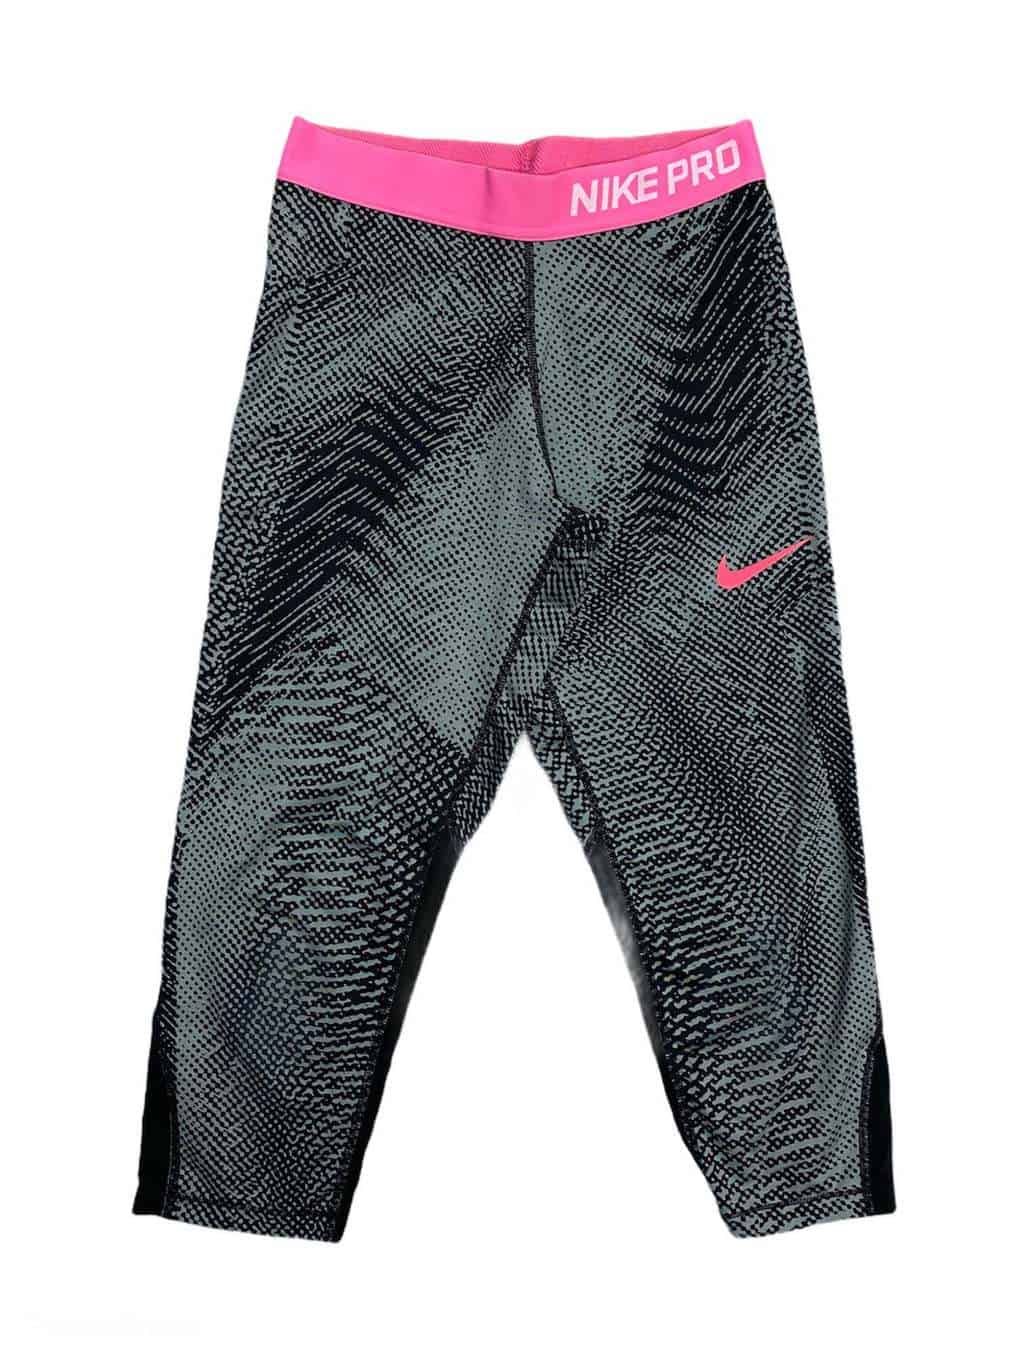 Women's Nike Pro 3/4 Length Leggings with Pink Waistband and Abstract Grey  and Black Motif - XS / S